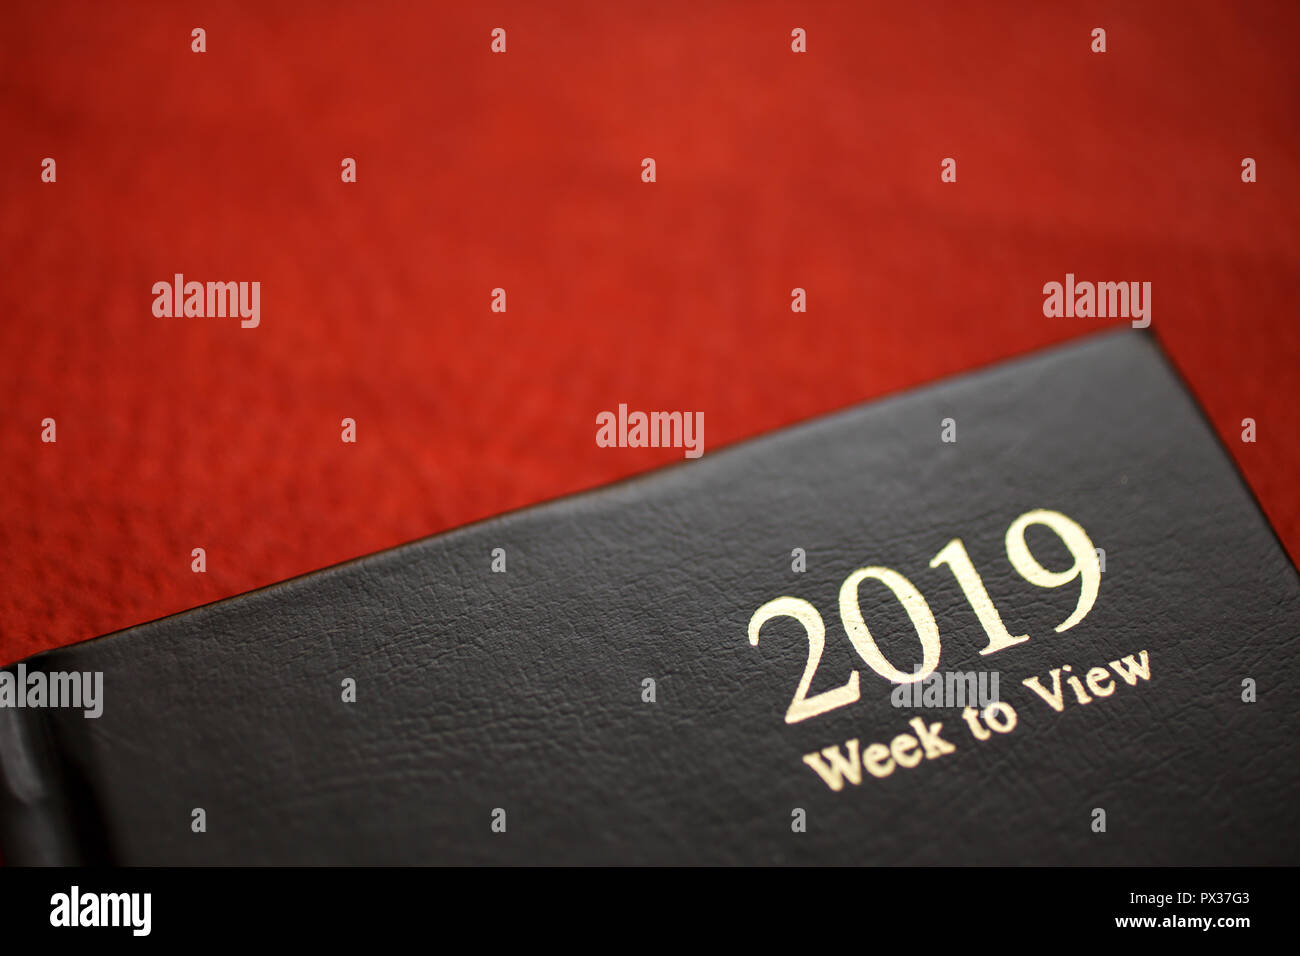 2019 Calendar on red leather Stock Photo